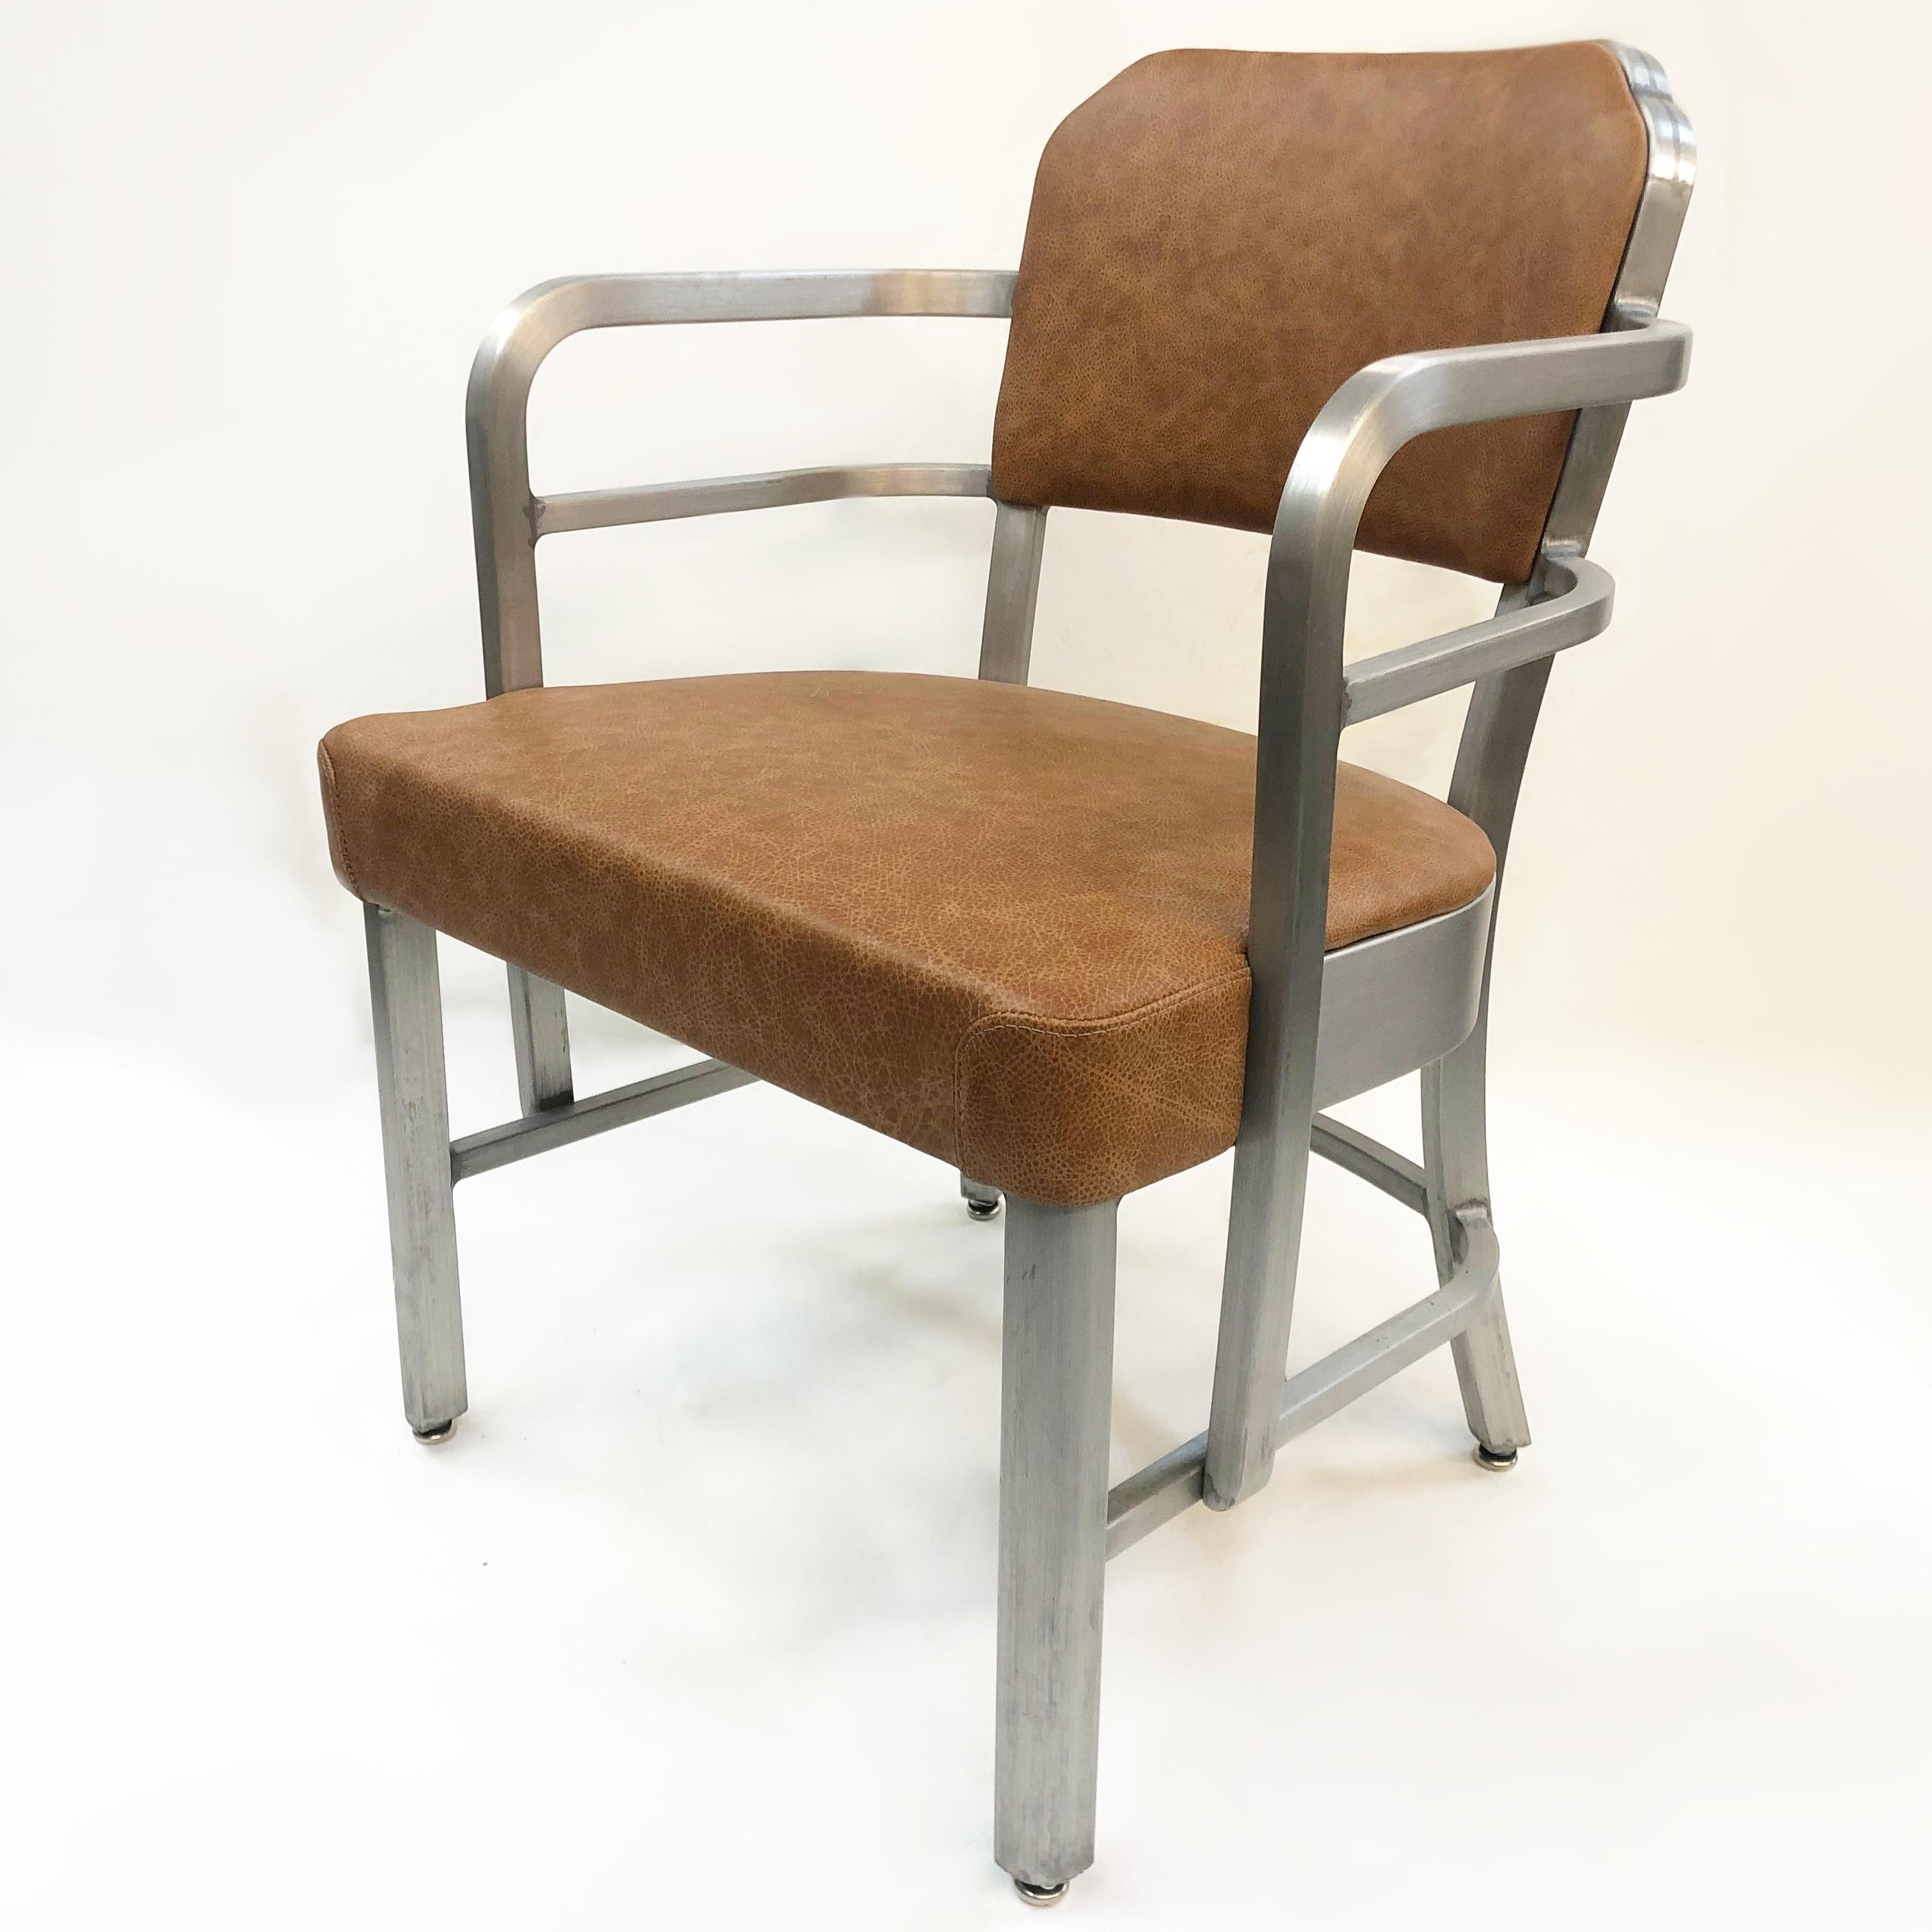 Rare Pair of Art Deco Industrial Aluminum & Leather Club Arm Chairs by GoodForm In Good Condition For Sale In Lafayette, IN